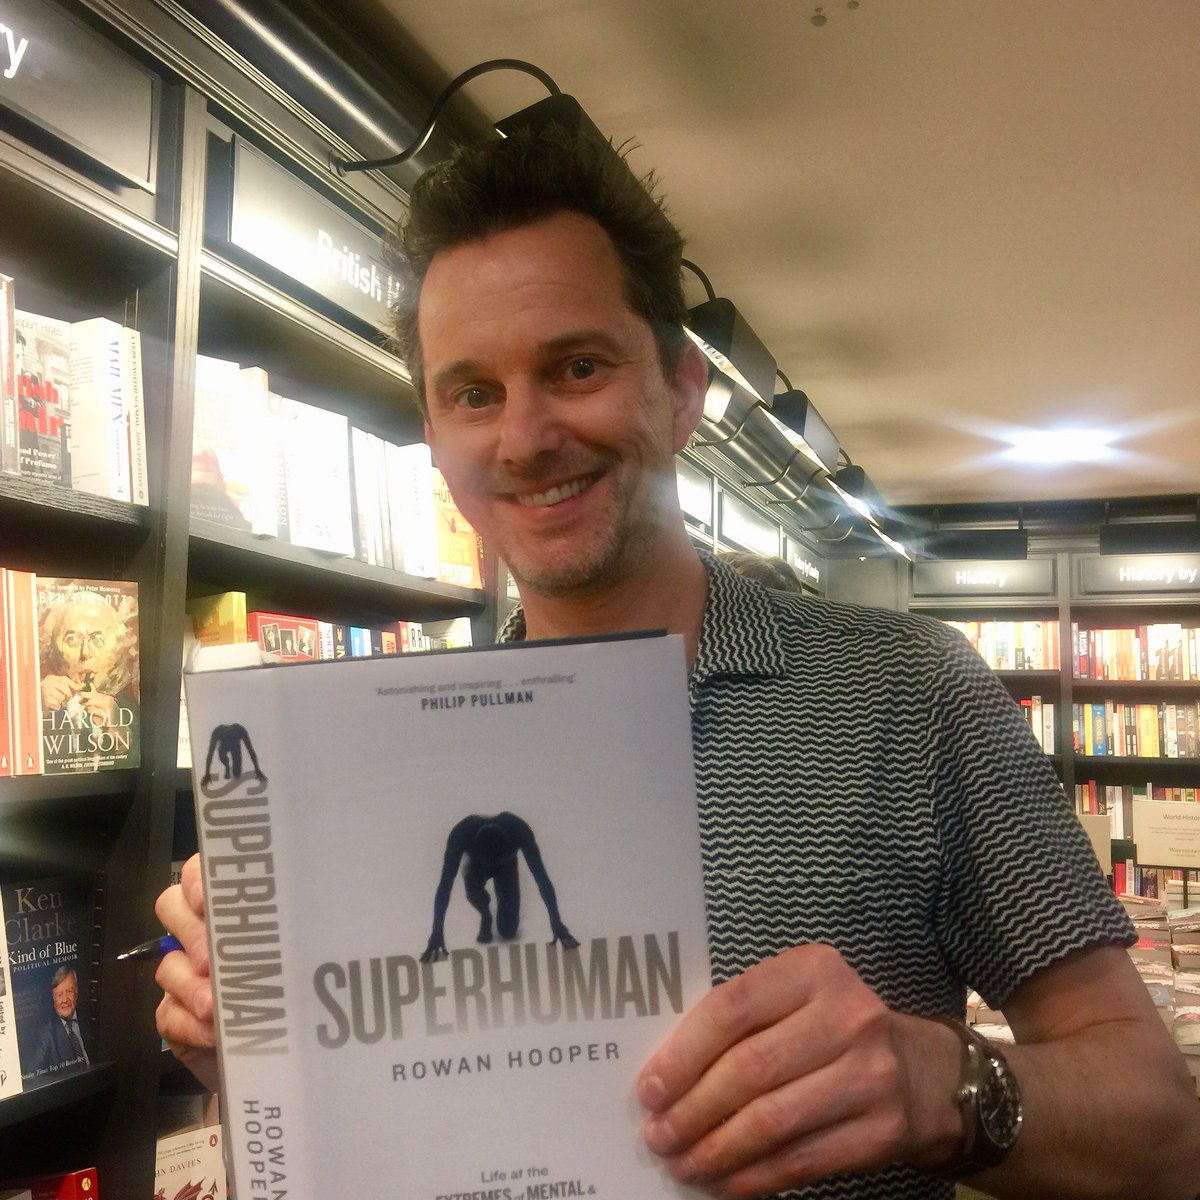 So proud of this guy and his book - hugest congrats to @rowhoop on the incredible SUPERHUMAN! (Check out that astounding blurb from Philip Pullman 😱😱😱)